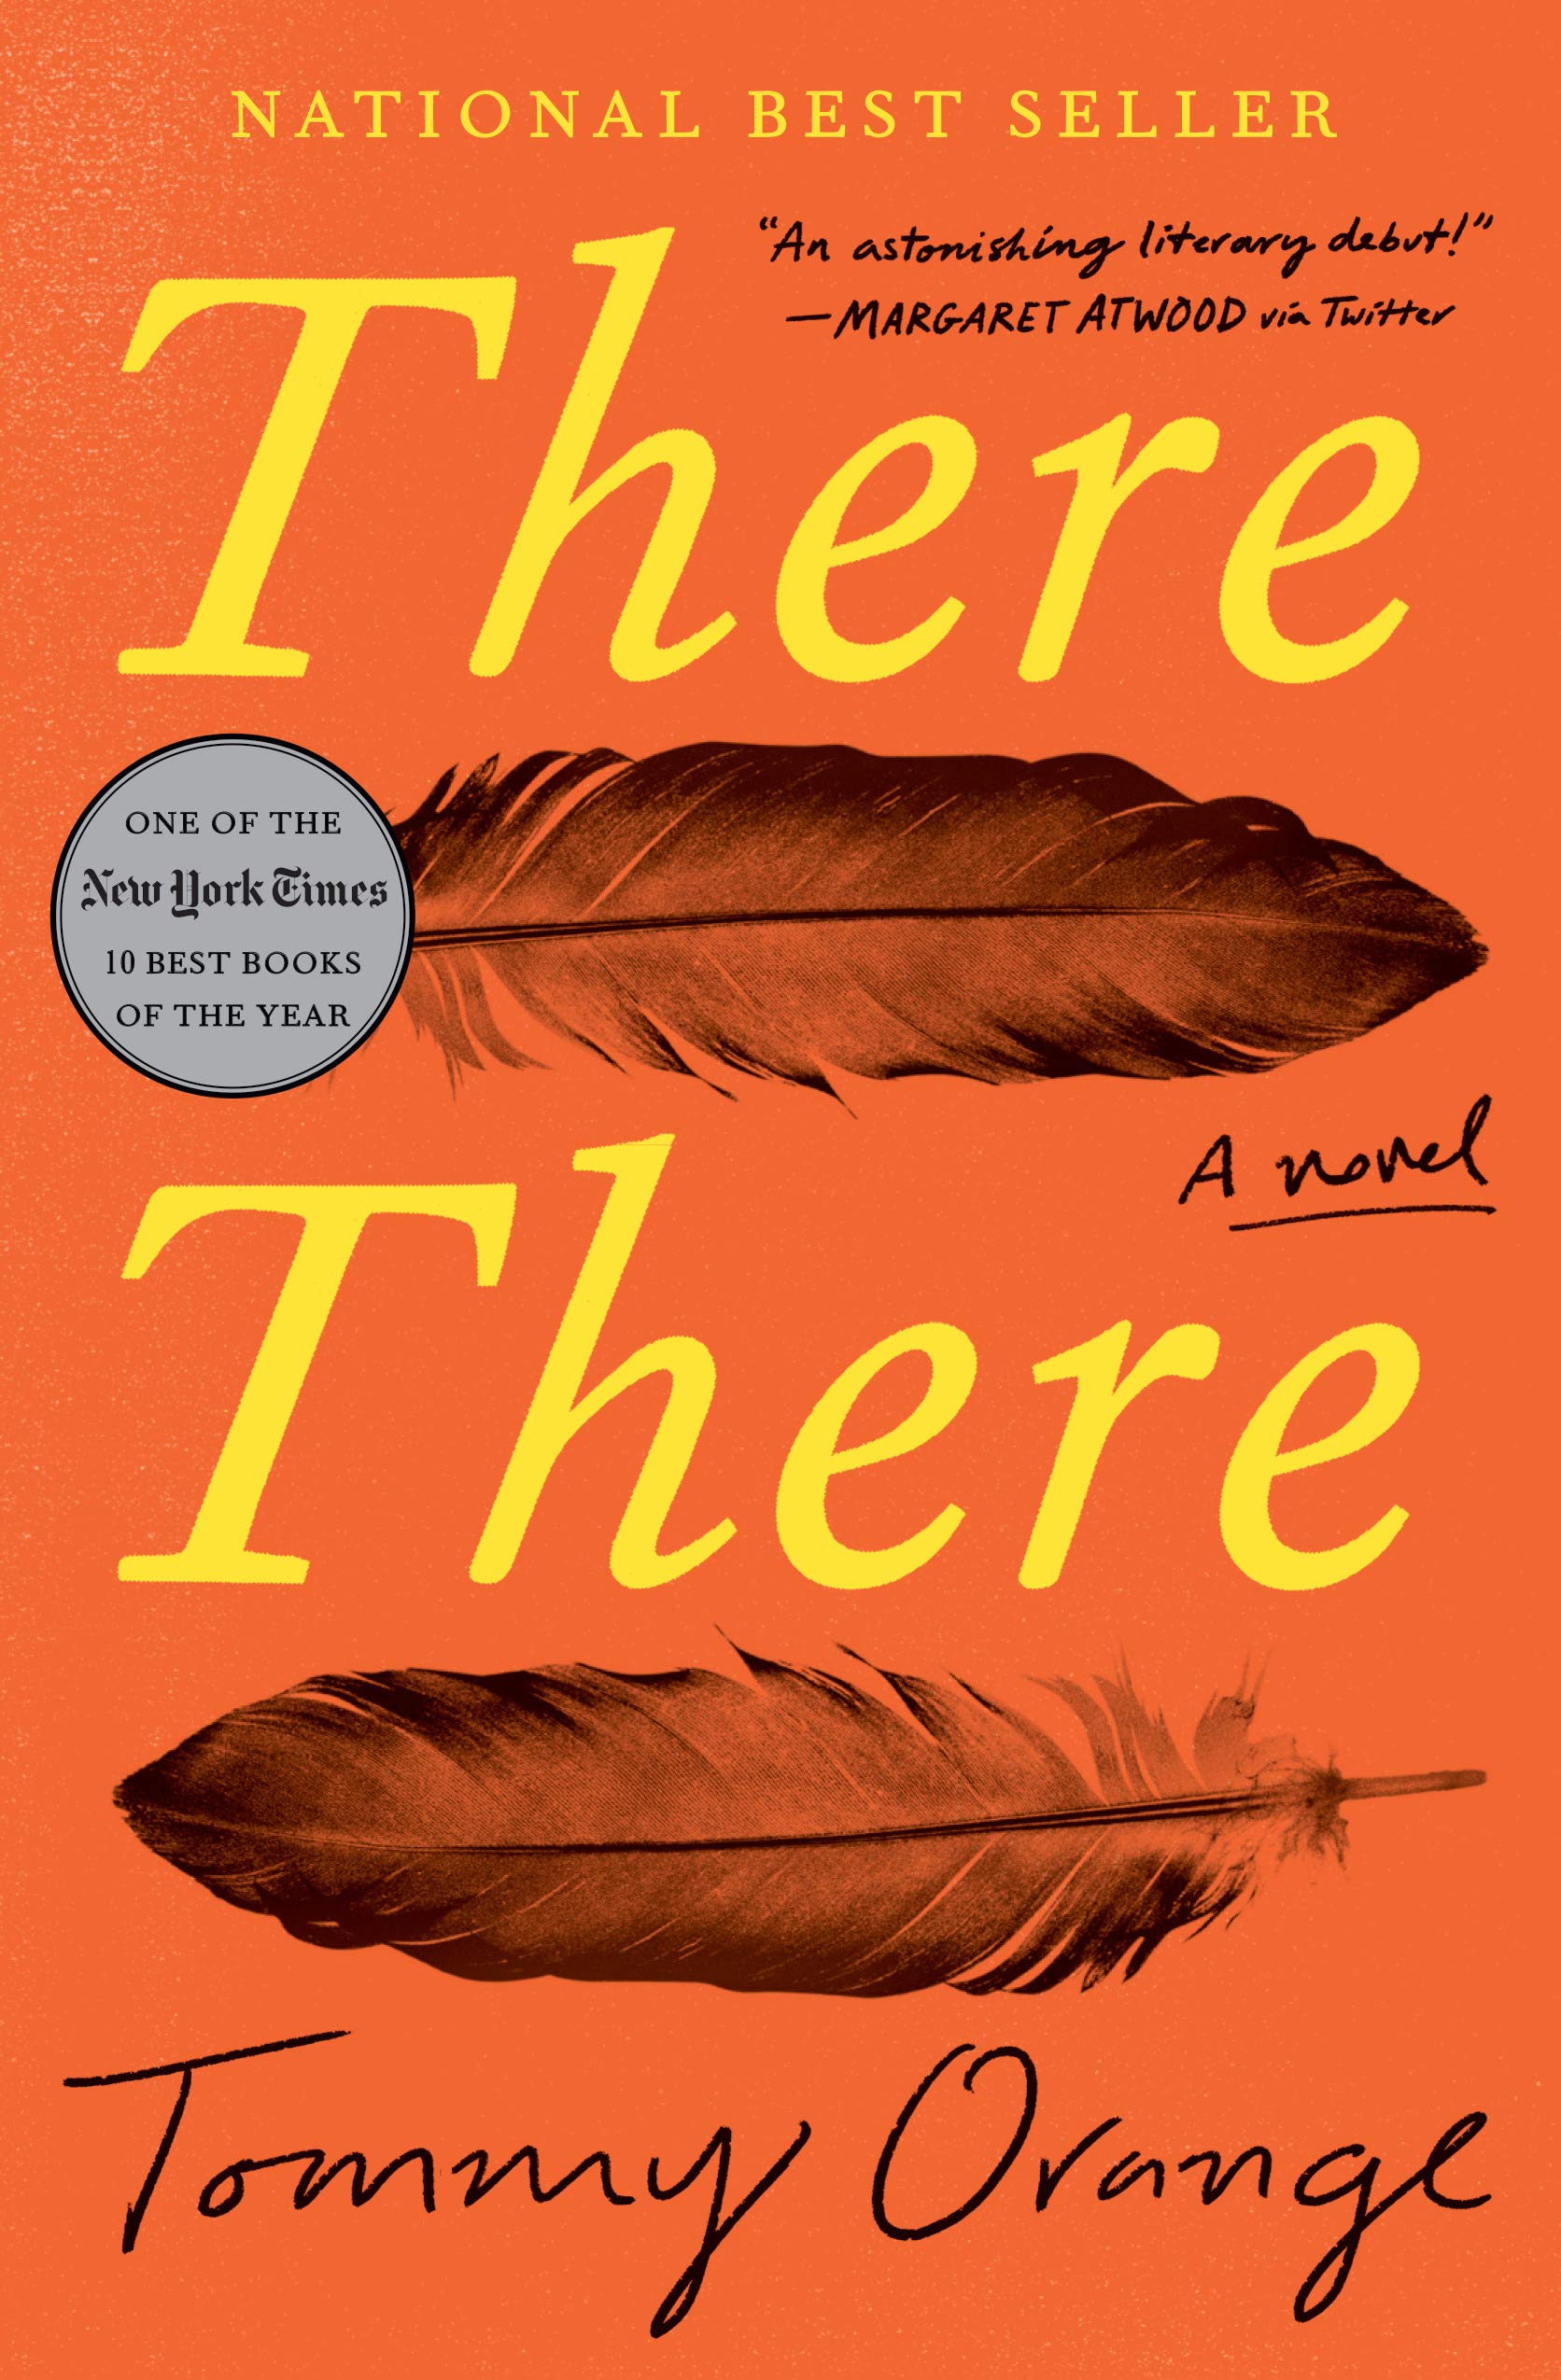 A vibrant red-orange book cover for the novel "there there" by tommy orange, featuring bold typography and stylized feather imagery, with accolades from esteemed author margaret atwood and a recognition as one of the 10 best books.